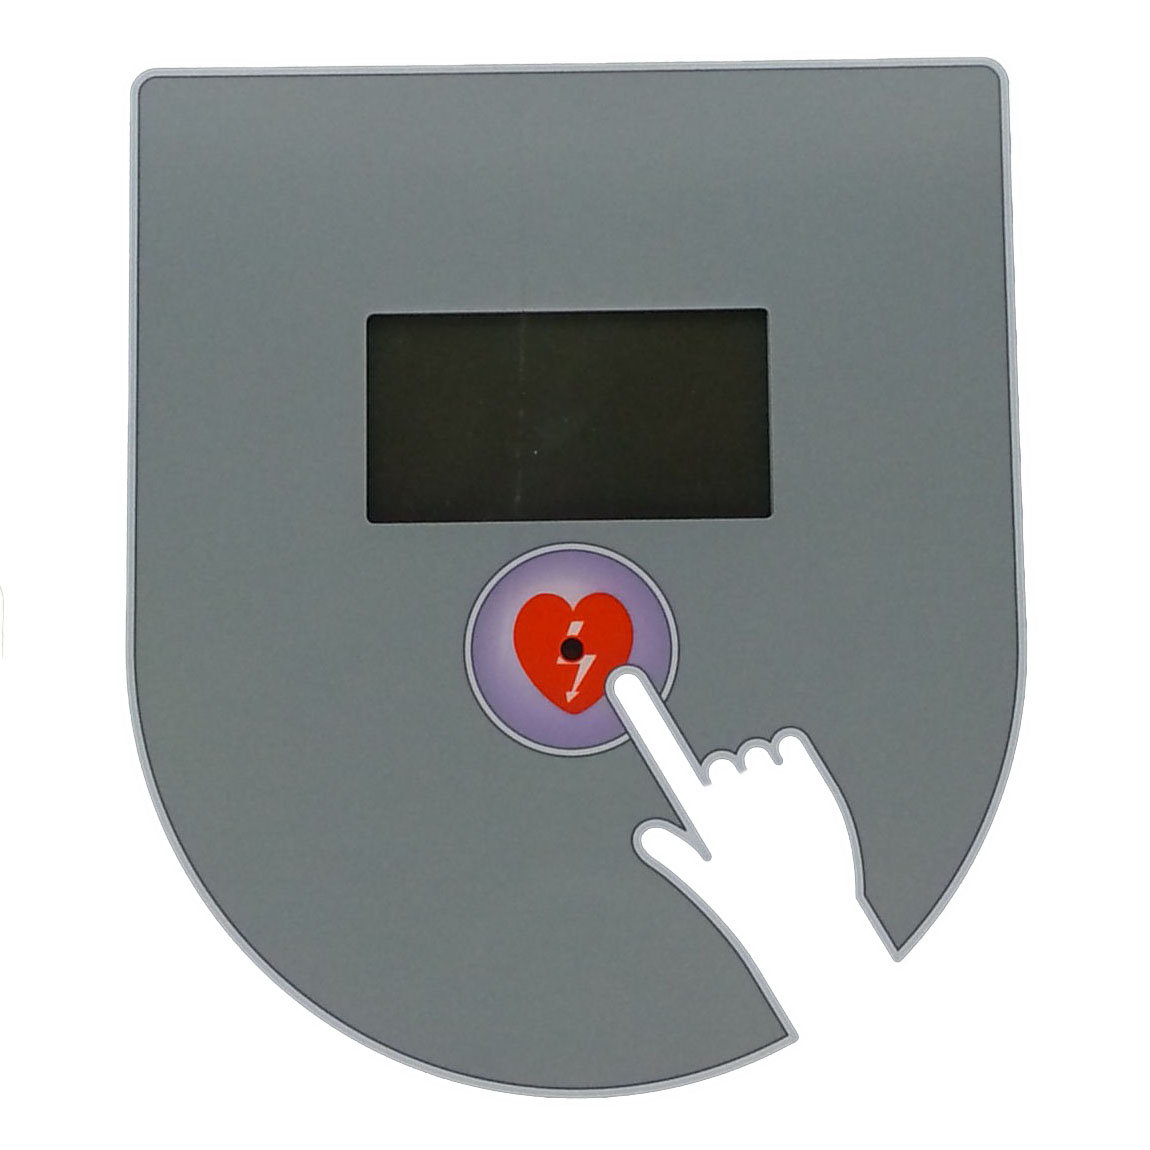 Zoll AED PLUS interface